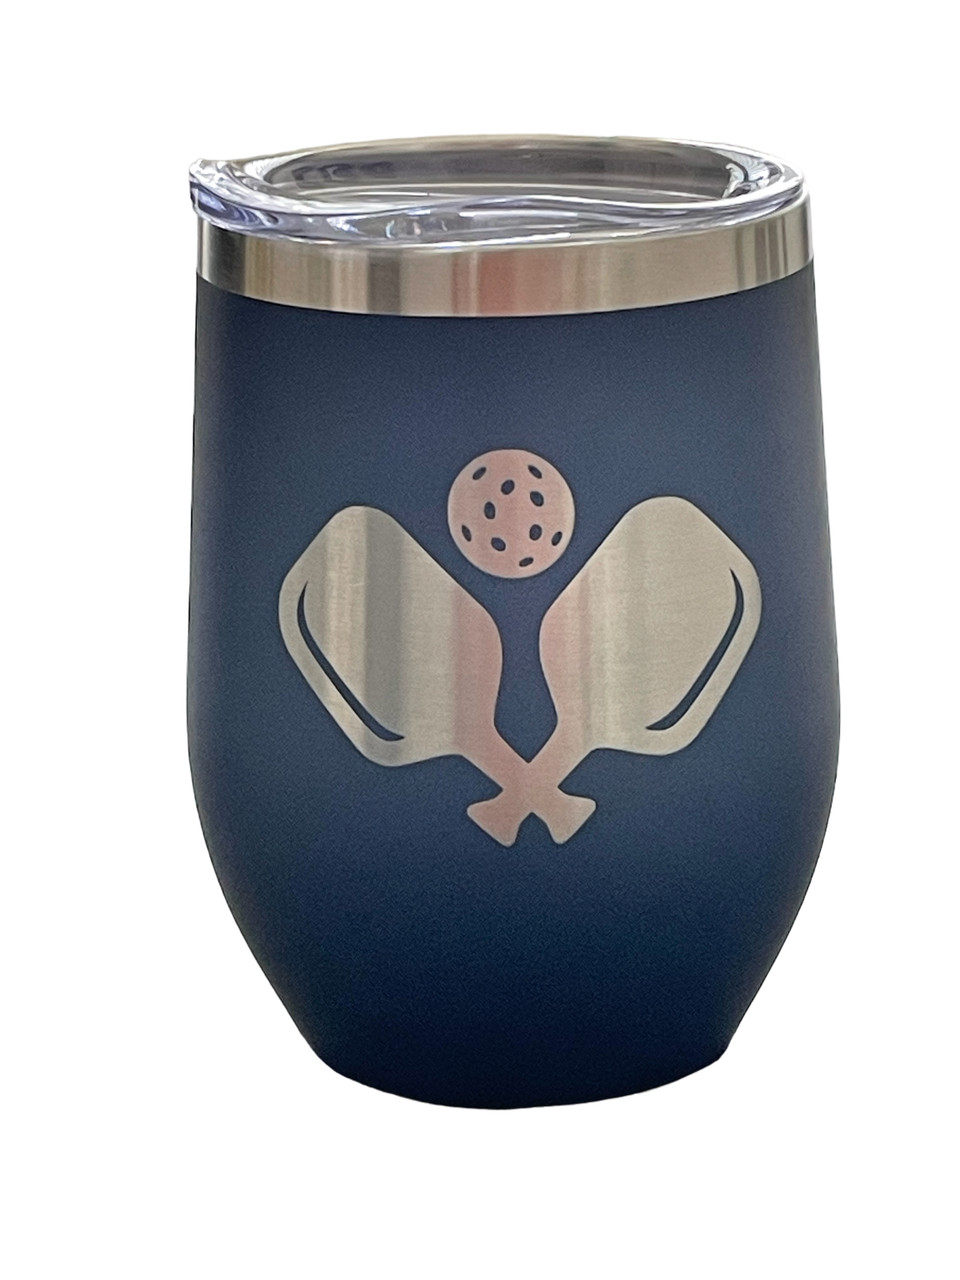  12 oz Stainless Steel Vacuum Insulated Tumbler